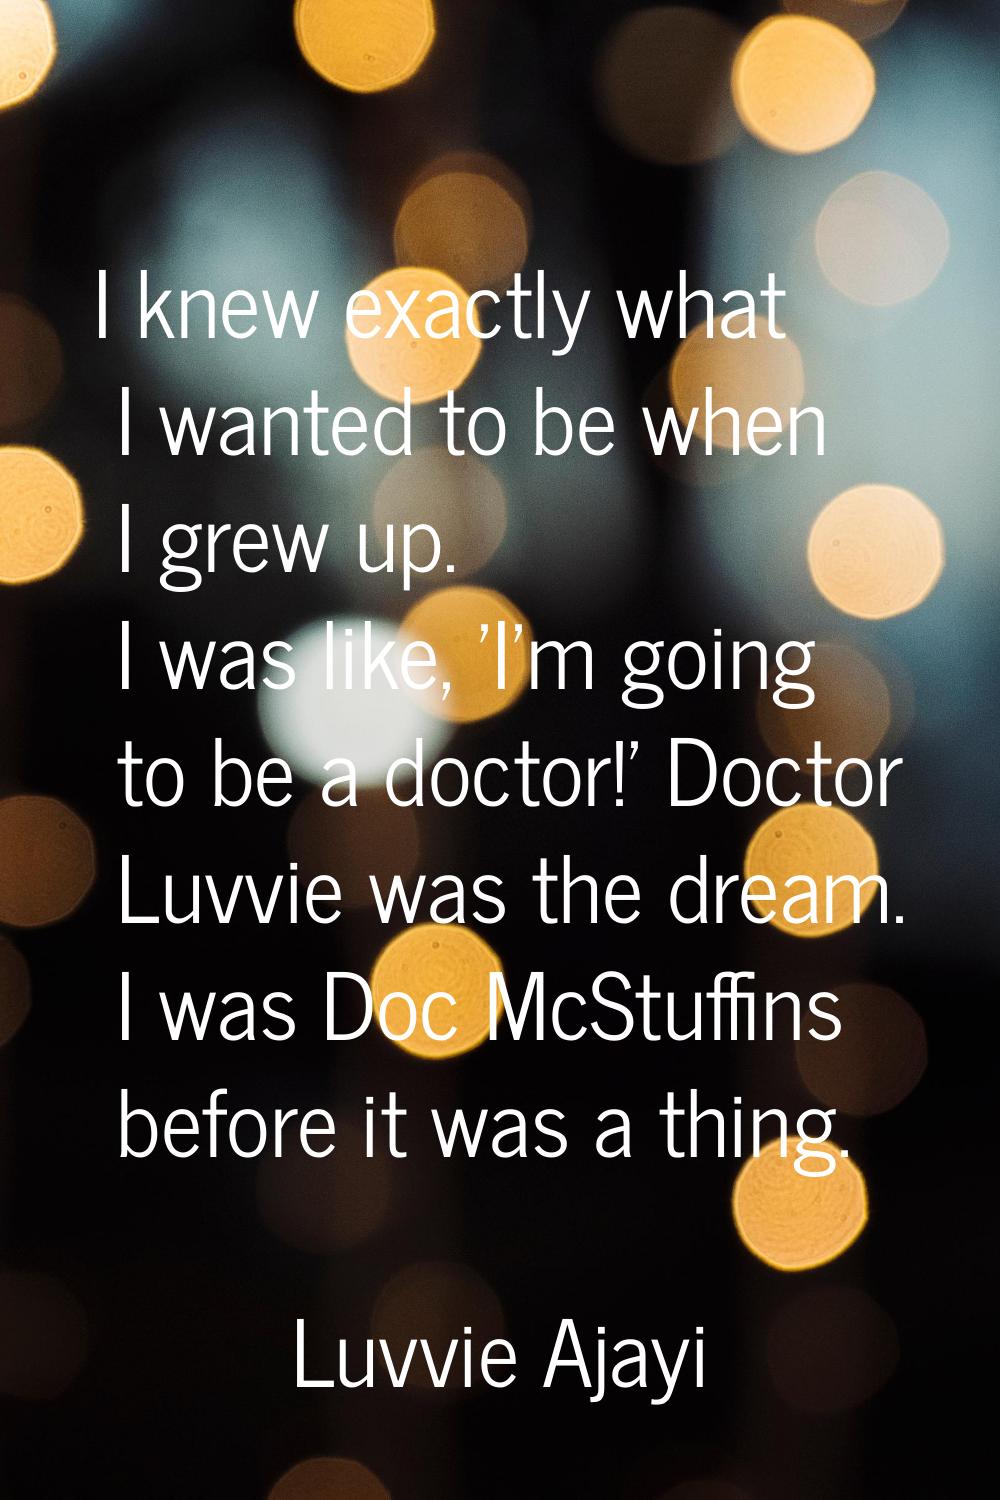 I knew exactly what I wanted to be when I grew up. I was like, 'I'm going to be a doctor!' Doctor L